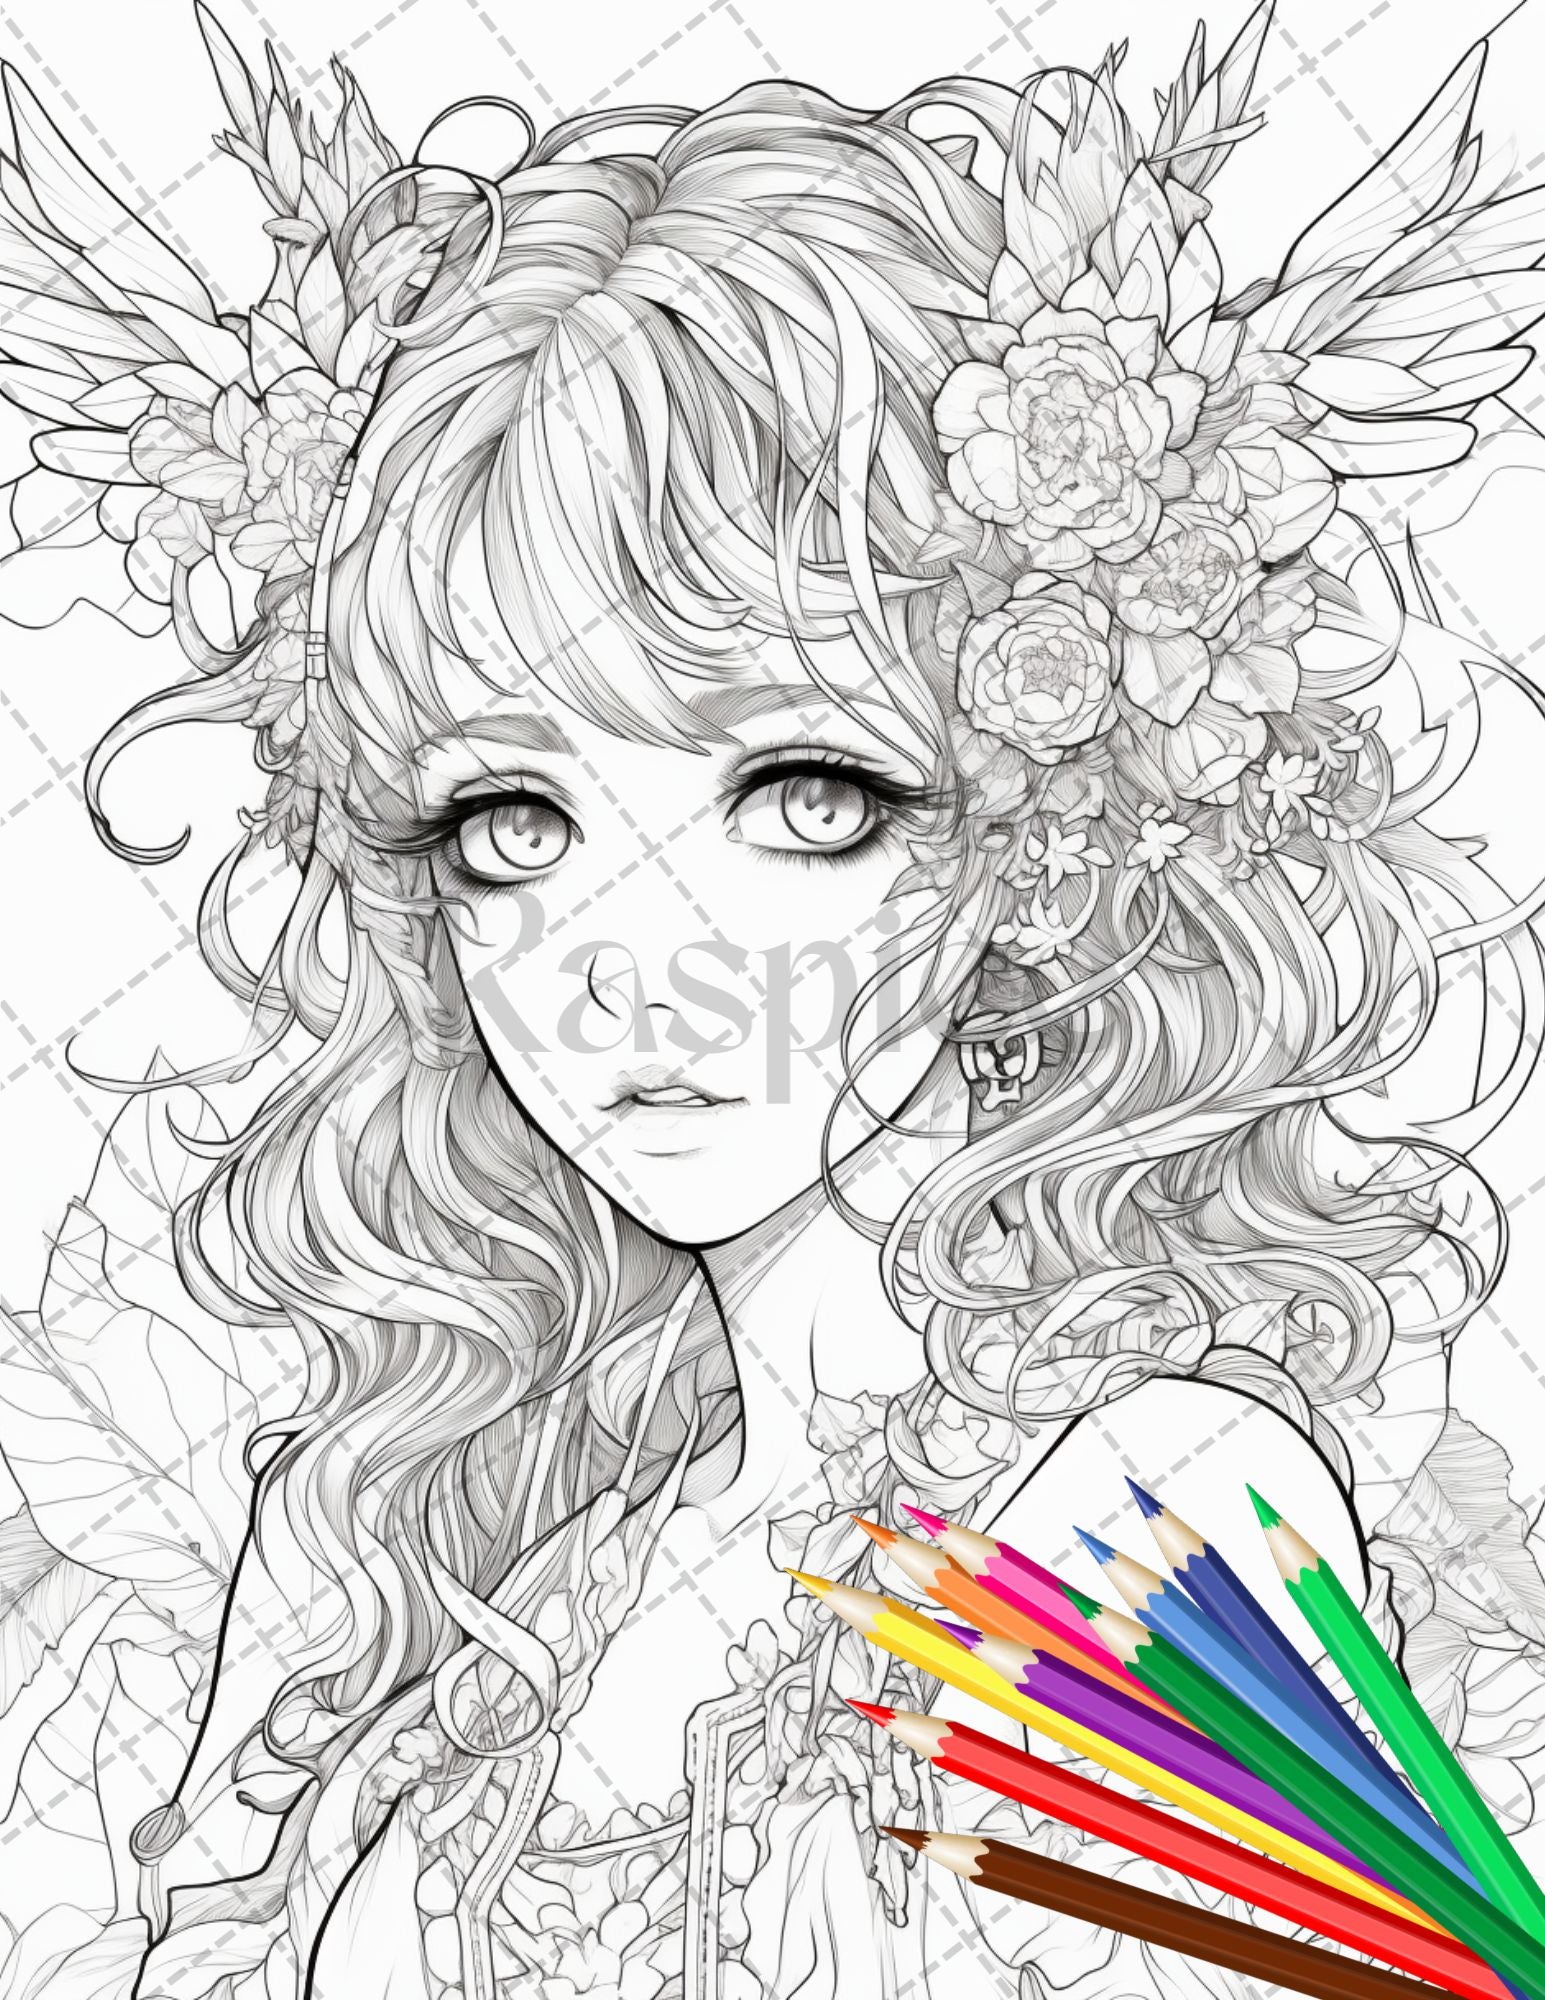 32 Anime Fairy Girl Printable Coloring Pages for Adults, Cute Fairy Grayscale Coloring Book, Printable PDF File Download - raspiee